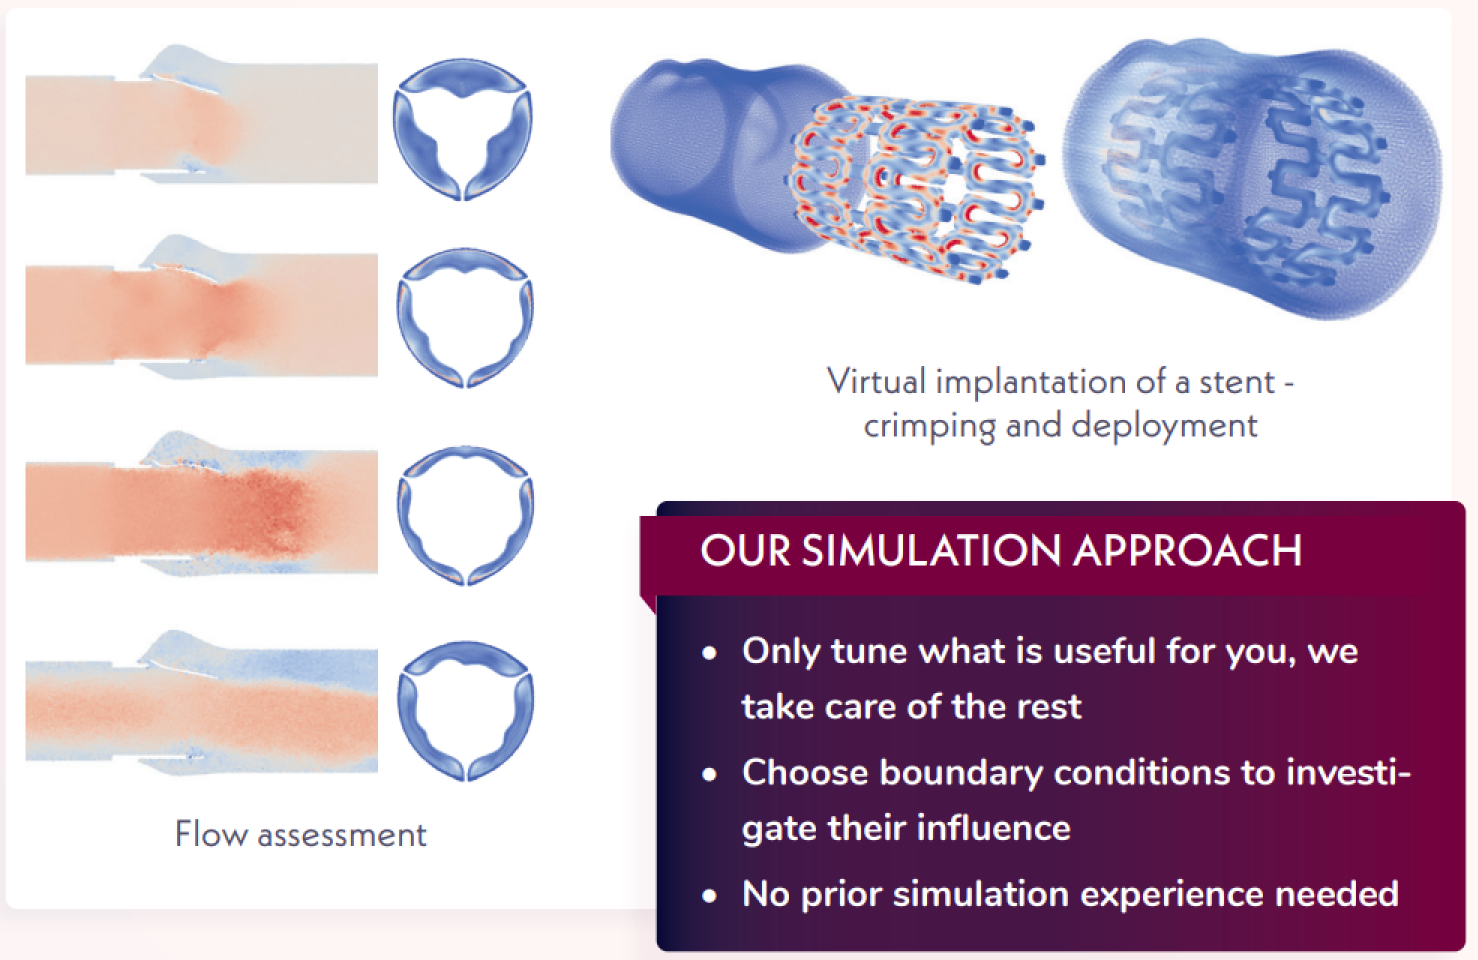 an image showing our medical simulation solution and explaining our approach